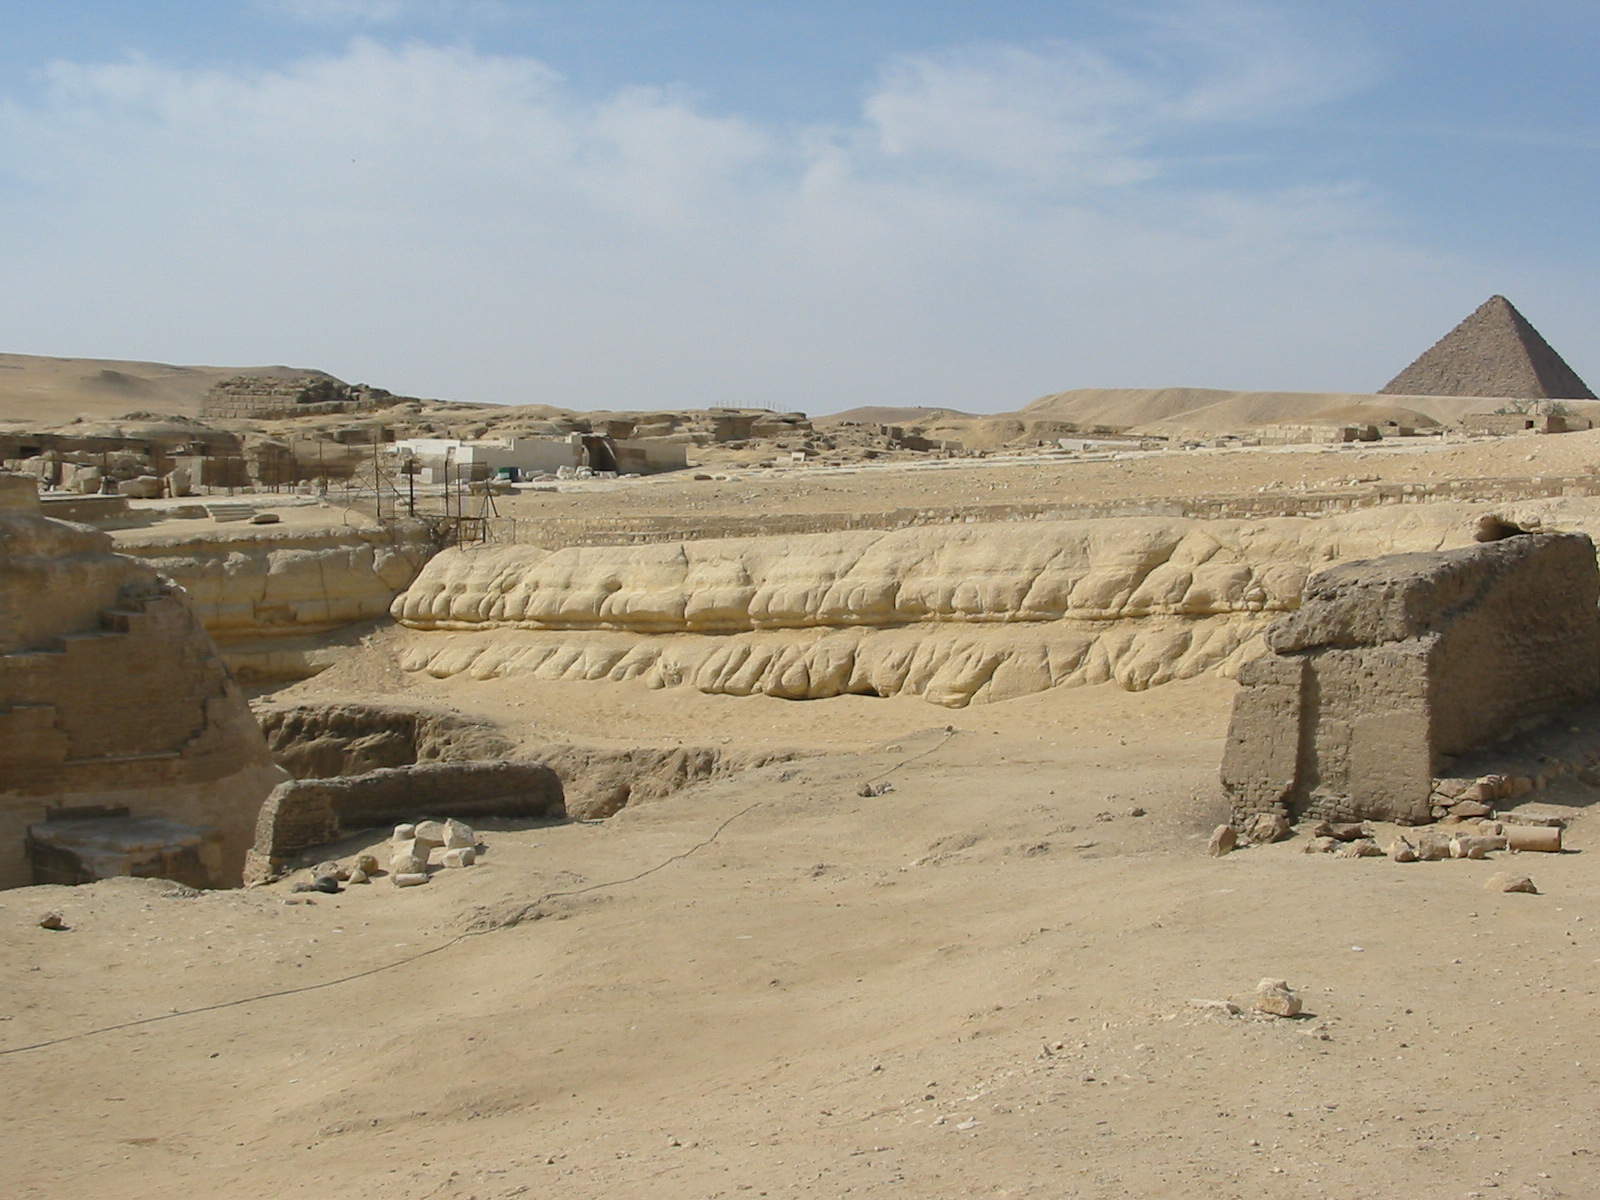 westwalllarge - Fossil Suggests The Pyramids And The Sphinx Were Once Submerged Under Water